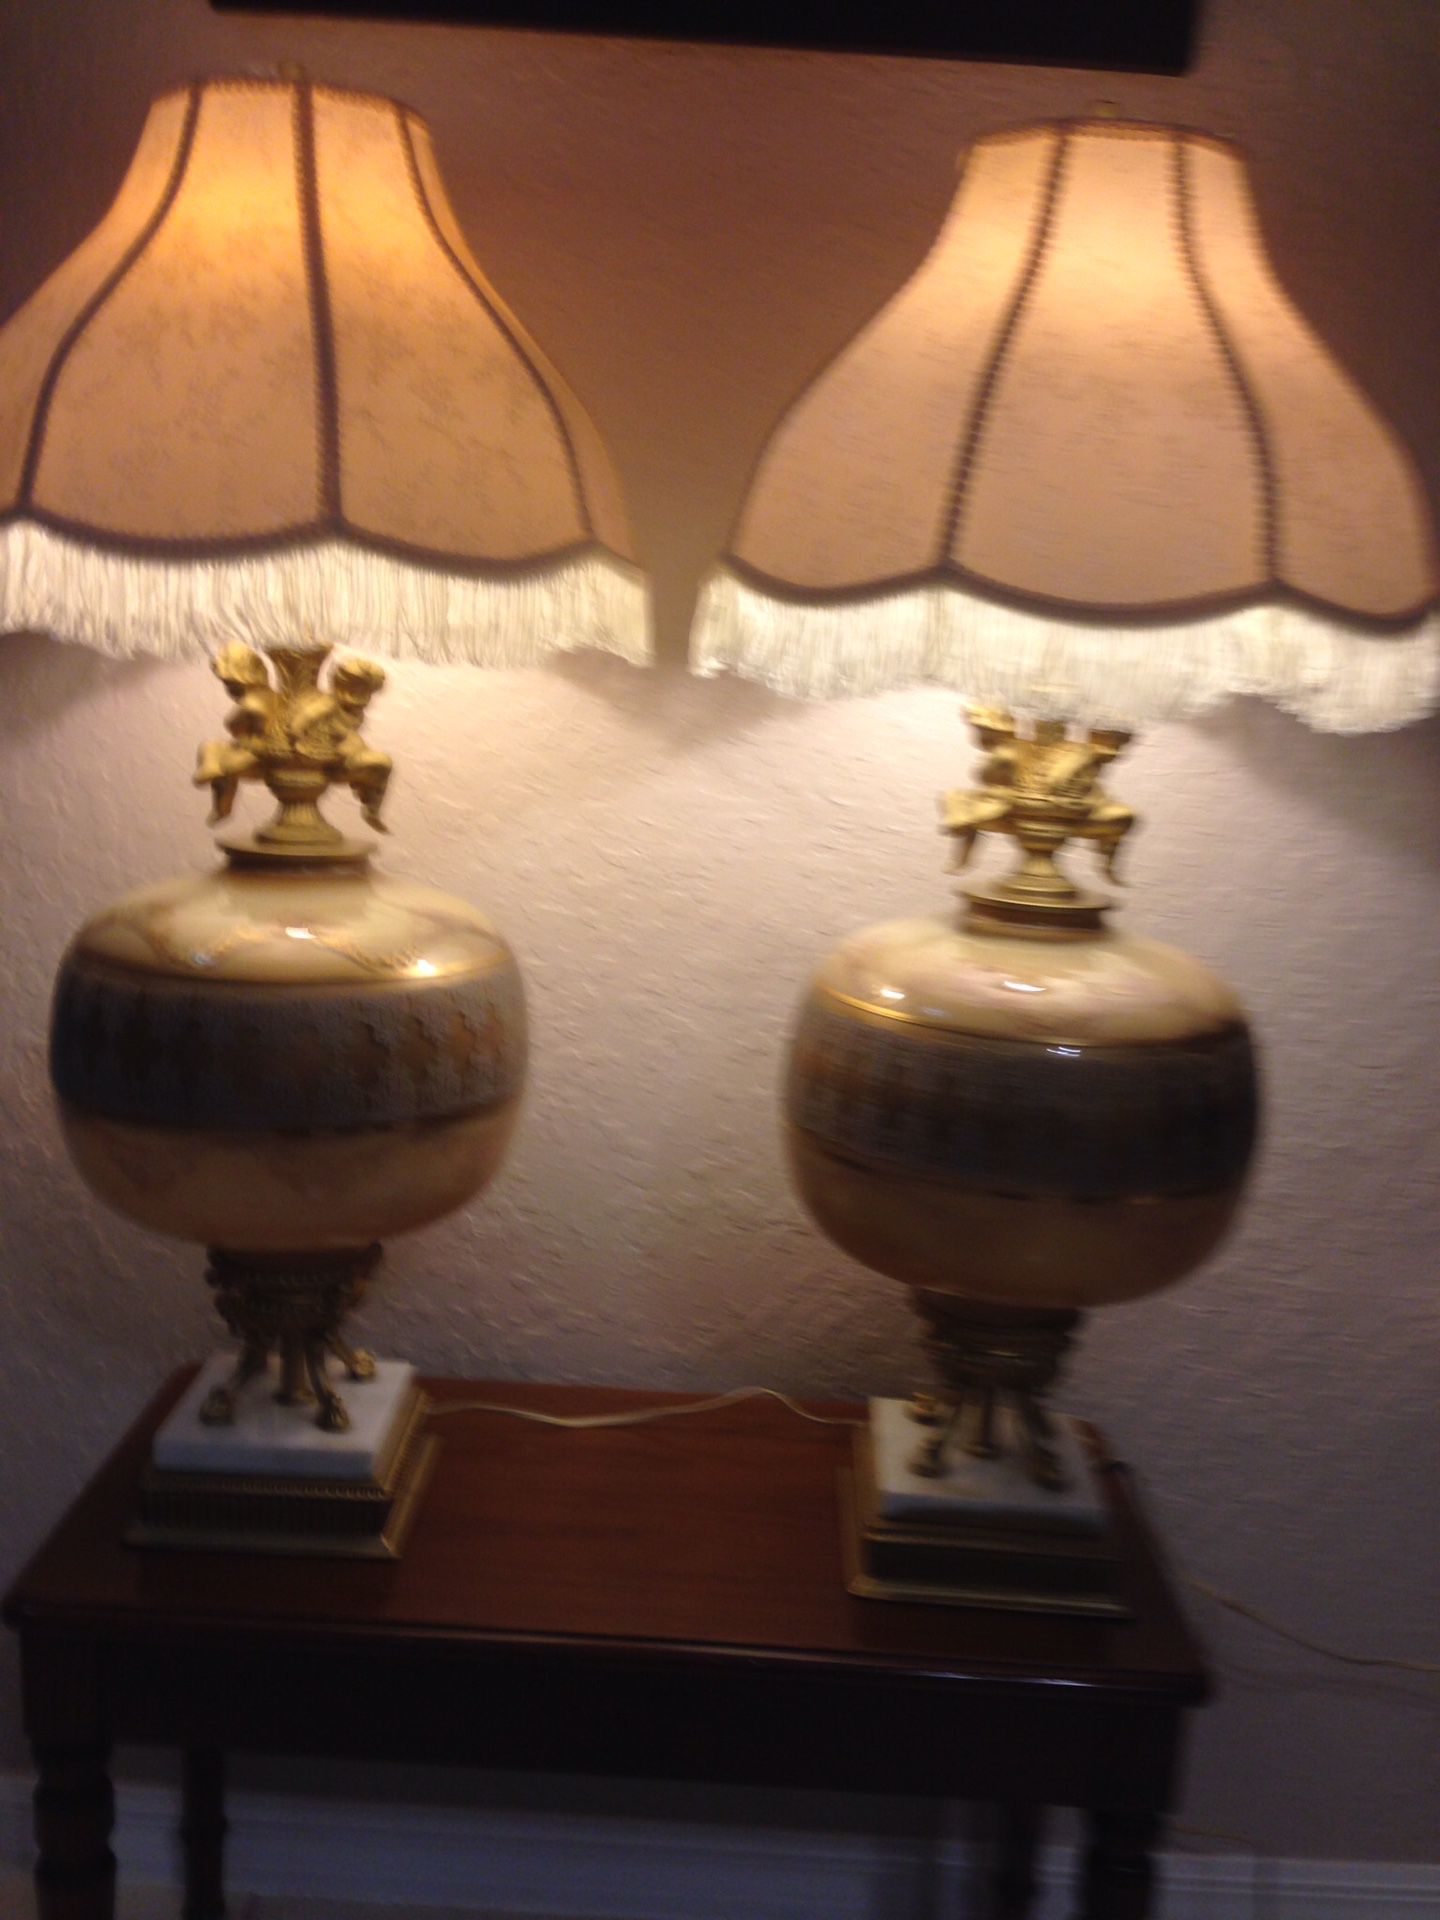 Vintage set of 2 table lamps, beautiful unique style!! Total 36 inches tall. (Pair for $300.00  or one for $175.00 )